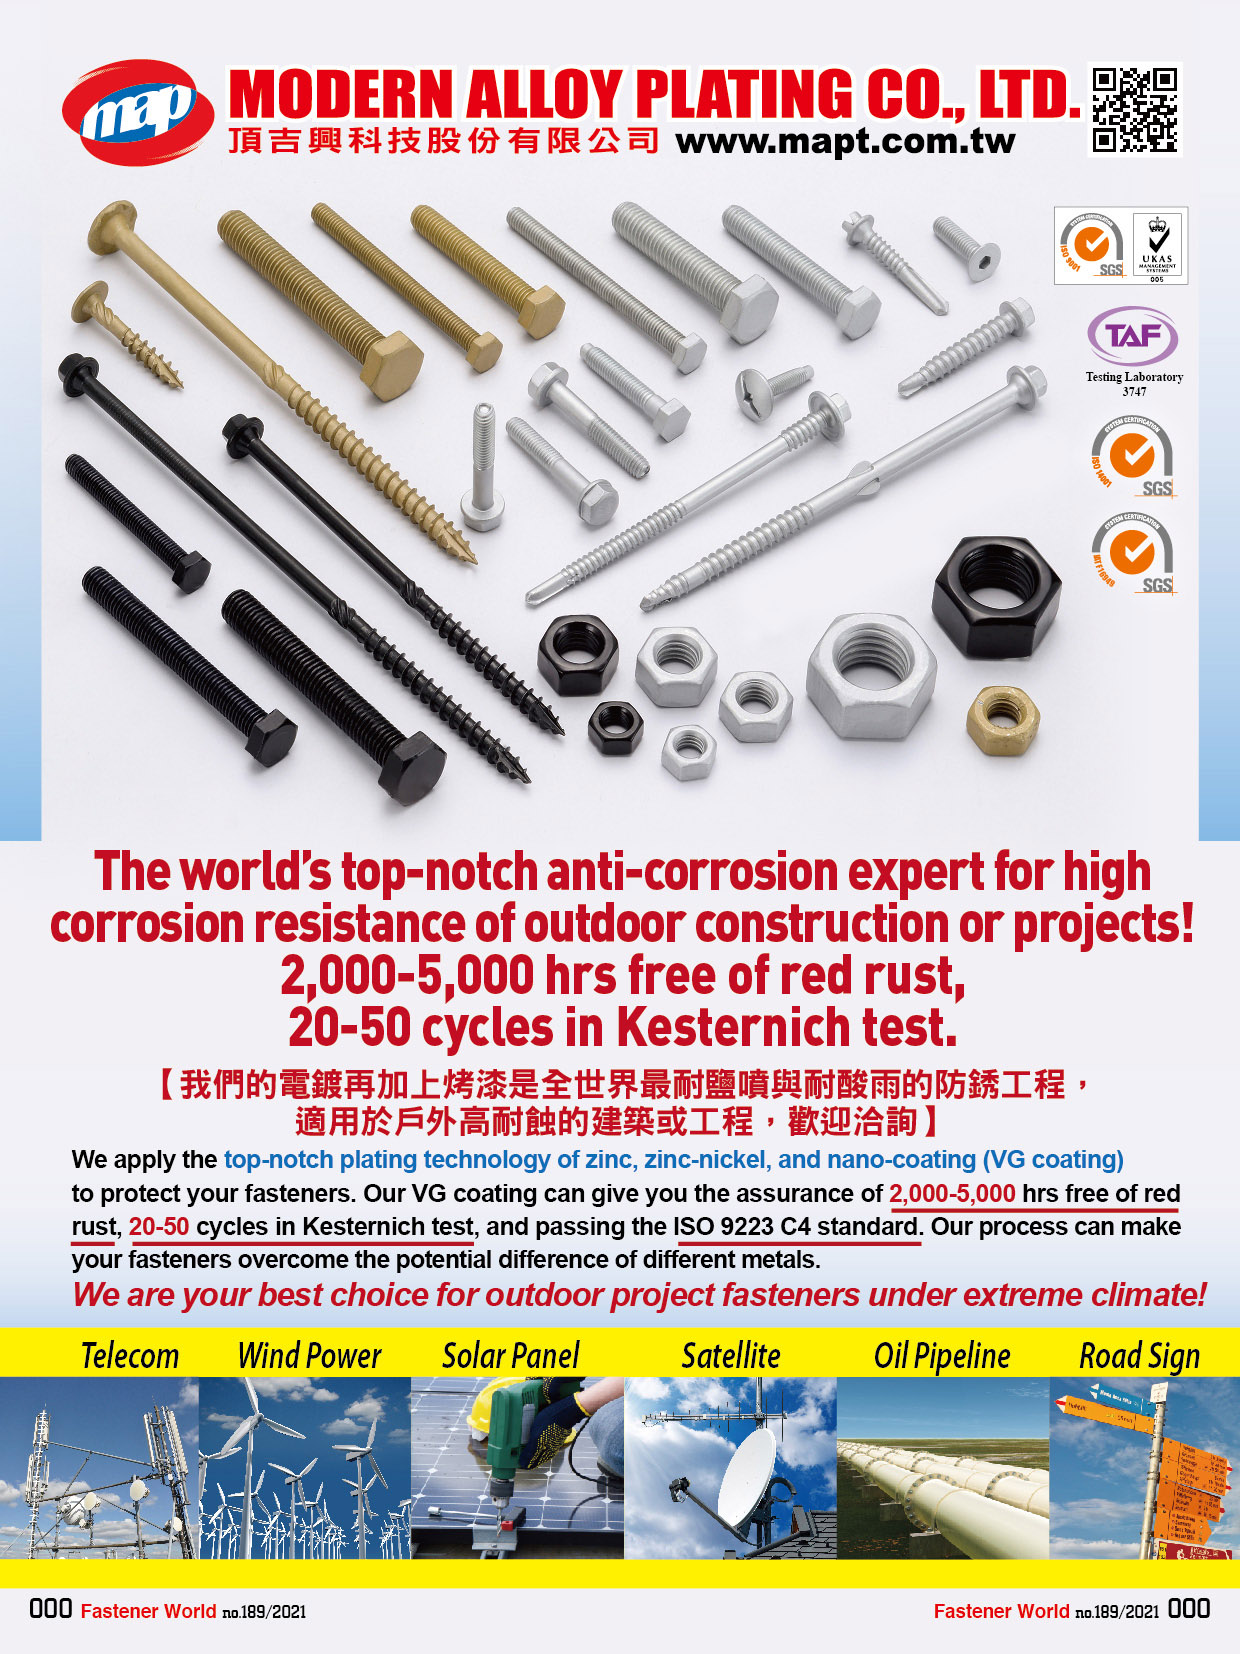 MODERN ALLOY PLATING CO., LTD.  , The world’s top-notch anti-corrosion expert for high corrosion resistance of outdoor construction or projects.